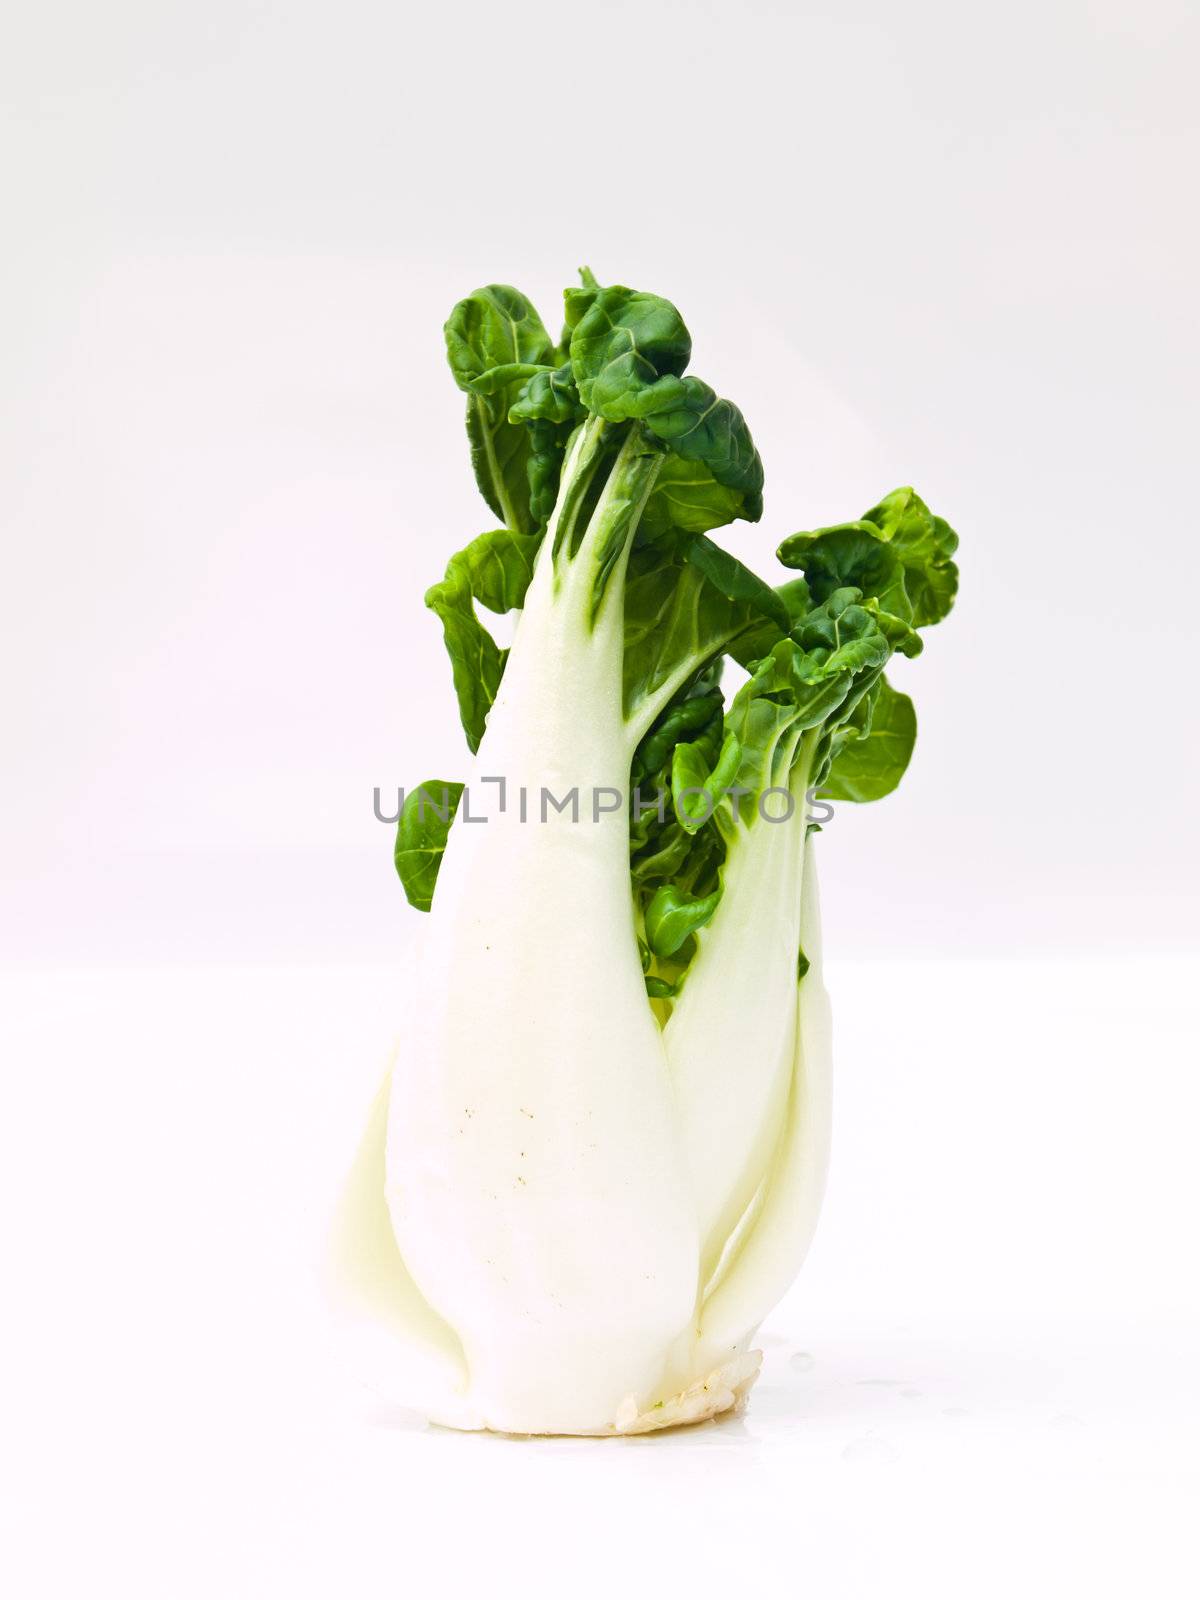 Fresh baby bok choy, Brassica rapa chinensis, isolated on white background